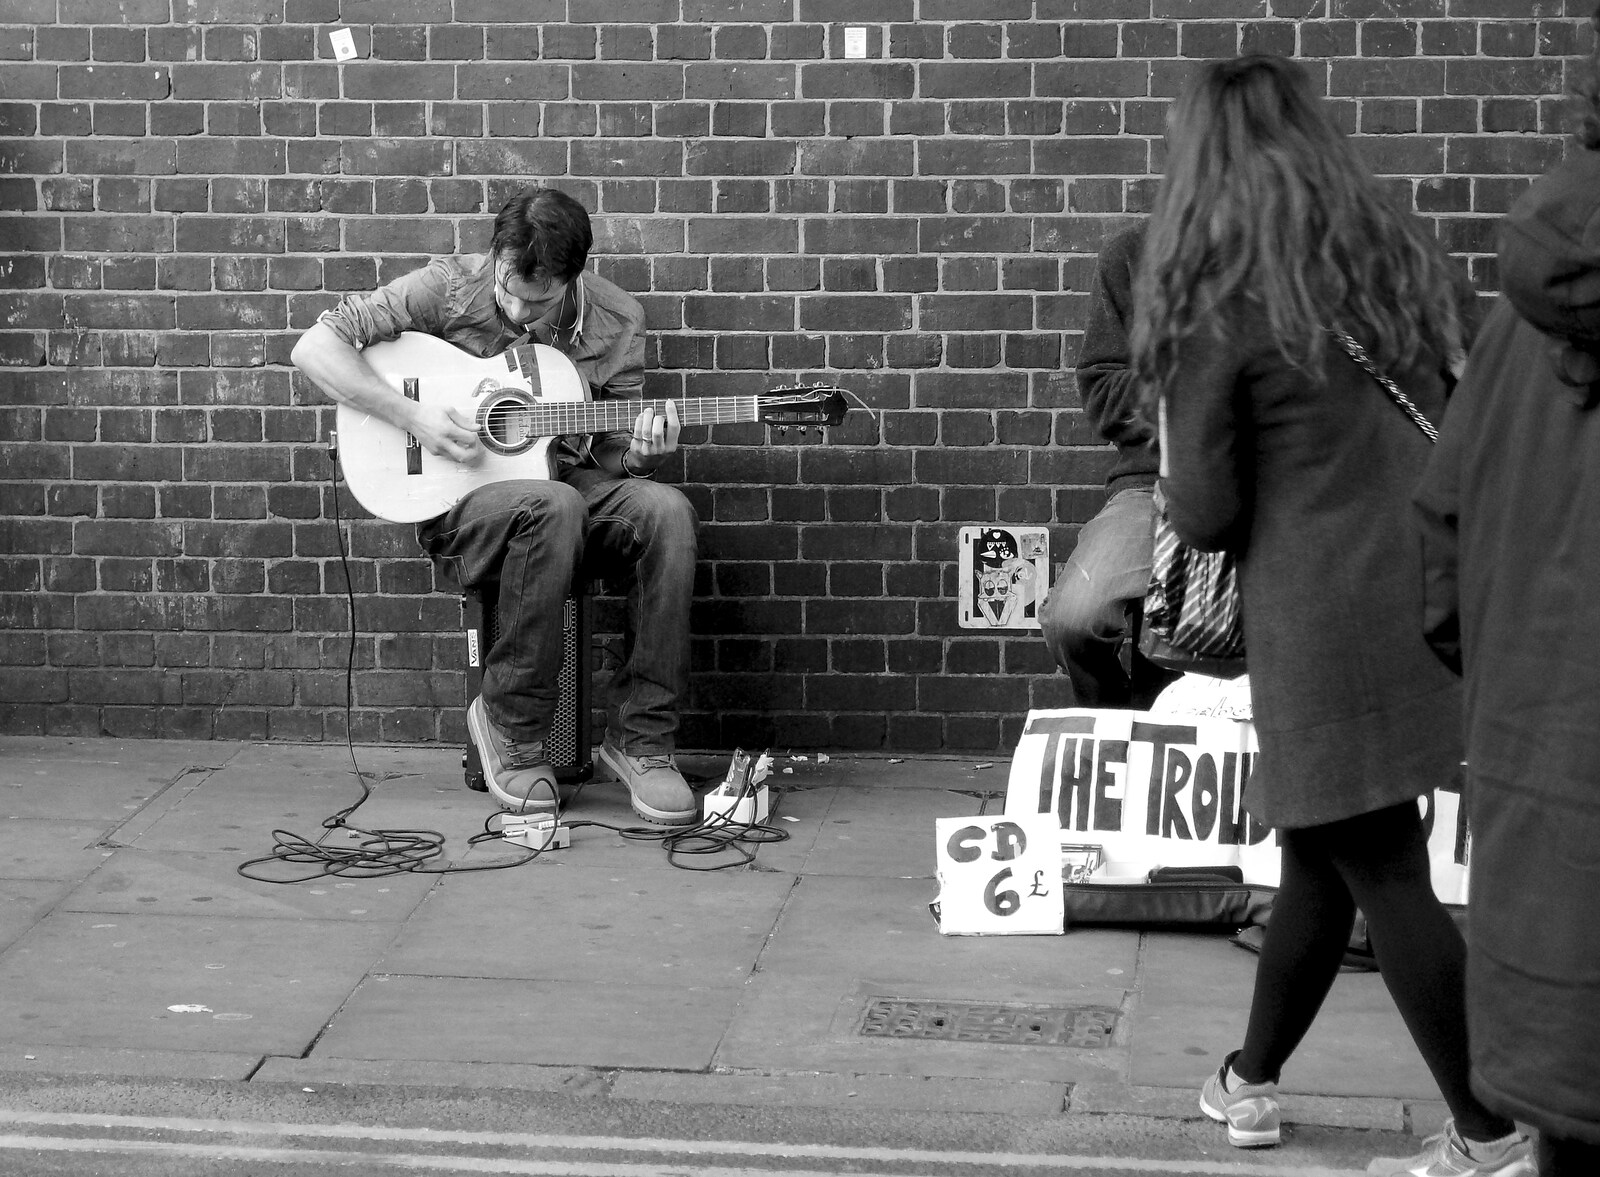 Guitar action on Brick Lane from Lunch in the East End, Spitalfields and Brick Lane, London - 1st December 2013